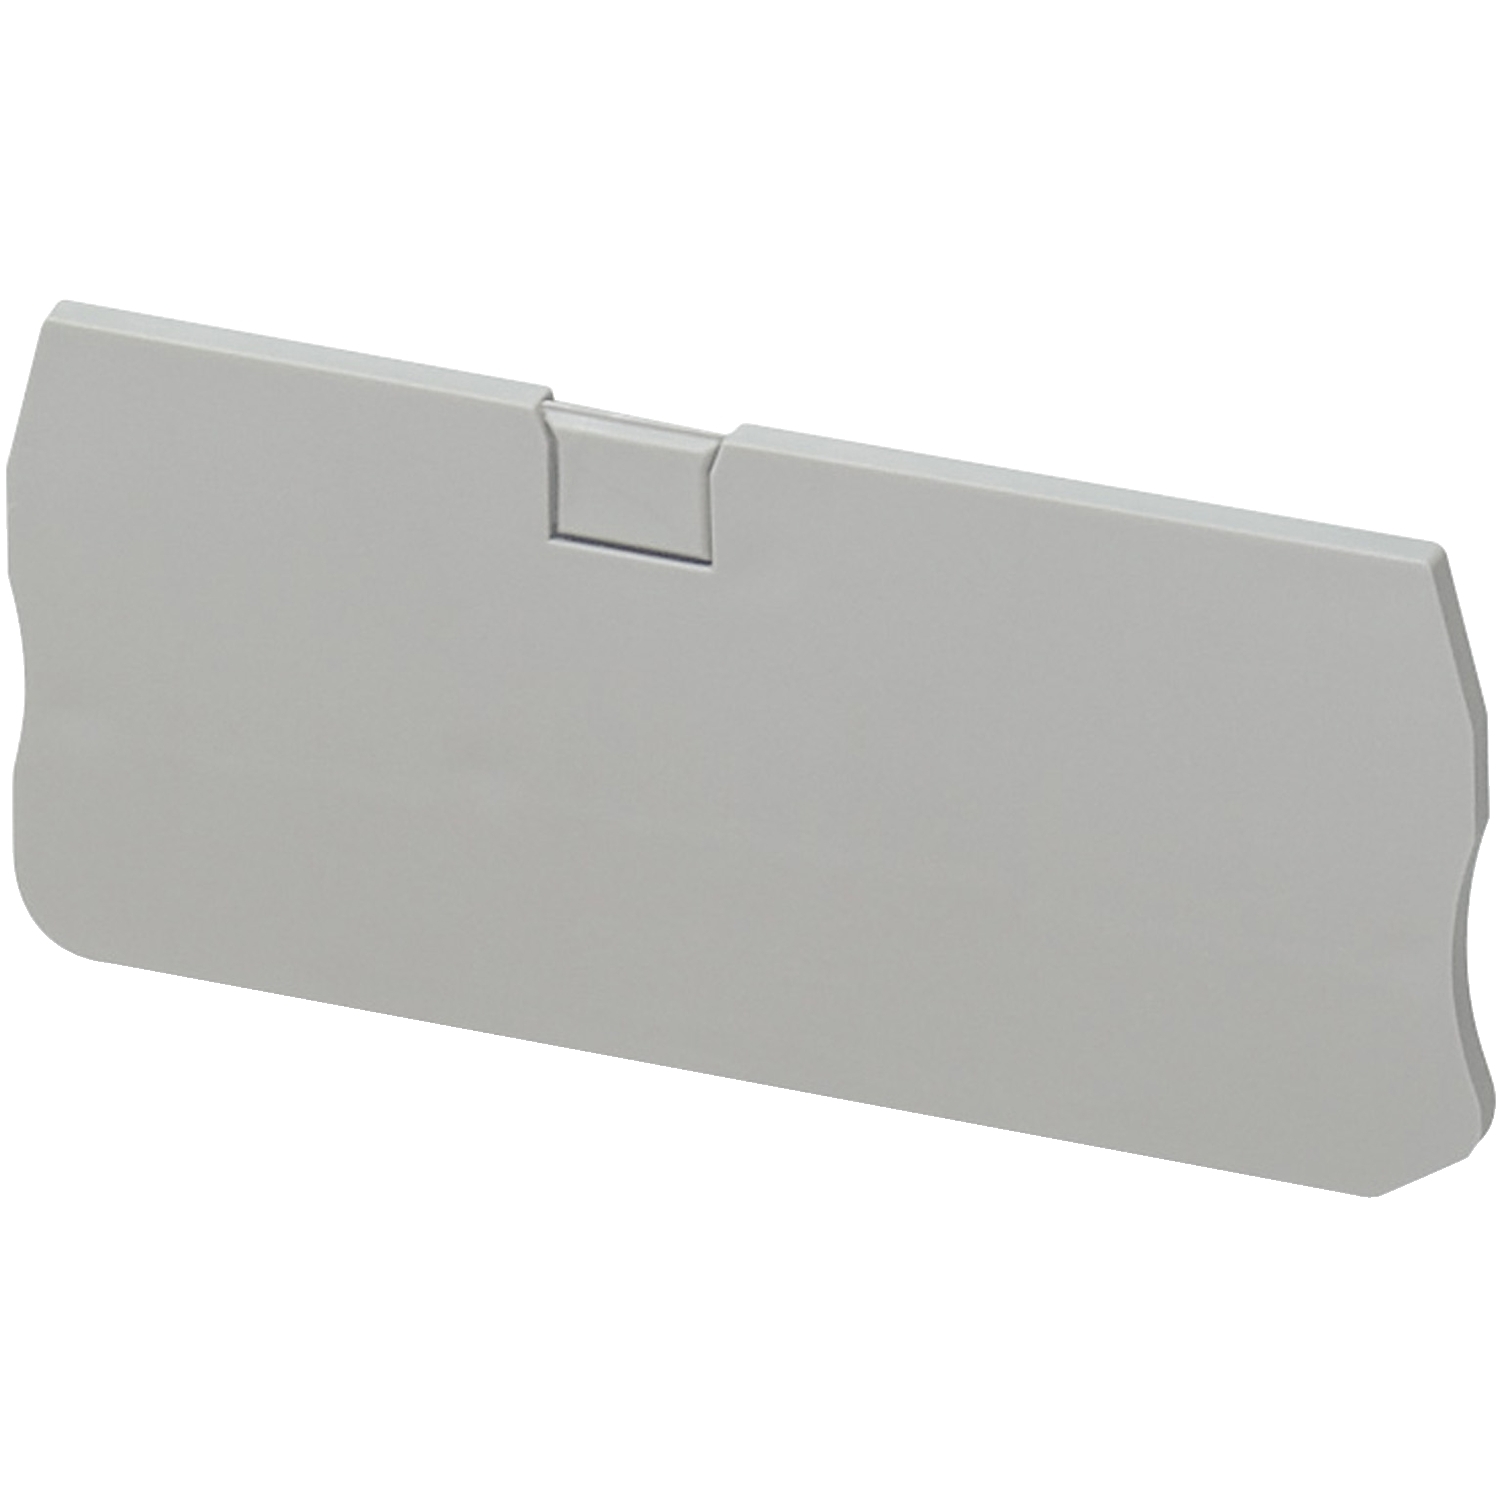 Cover plate, Linergy TR, 2.2mm width, 4 points, for spring terminals nsytrr24, NSYTRR23, grey, Set of 50